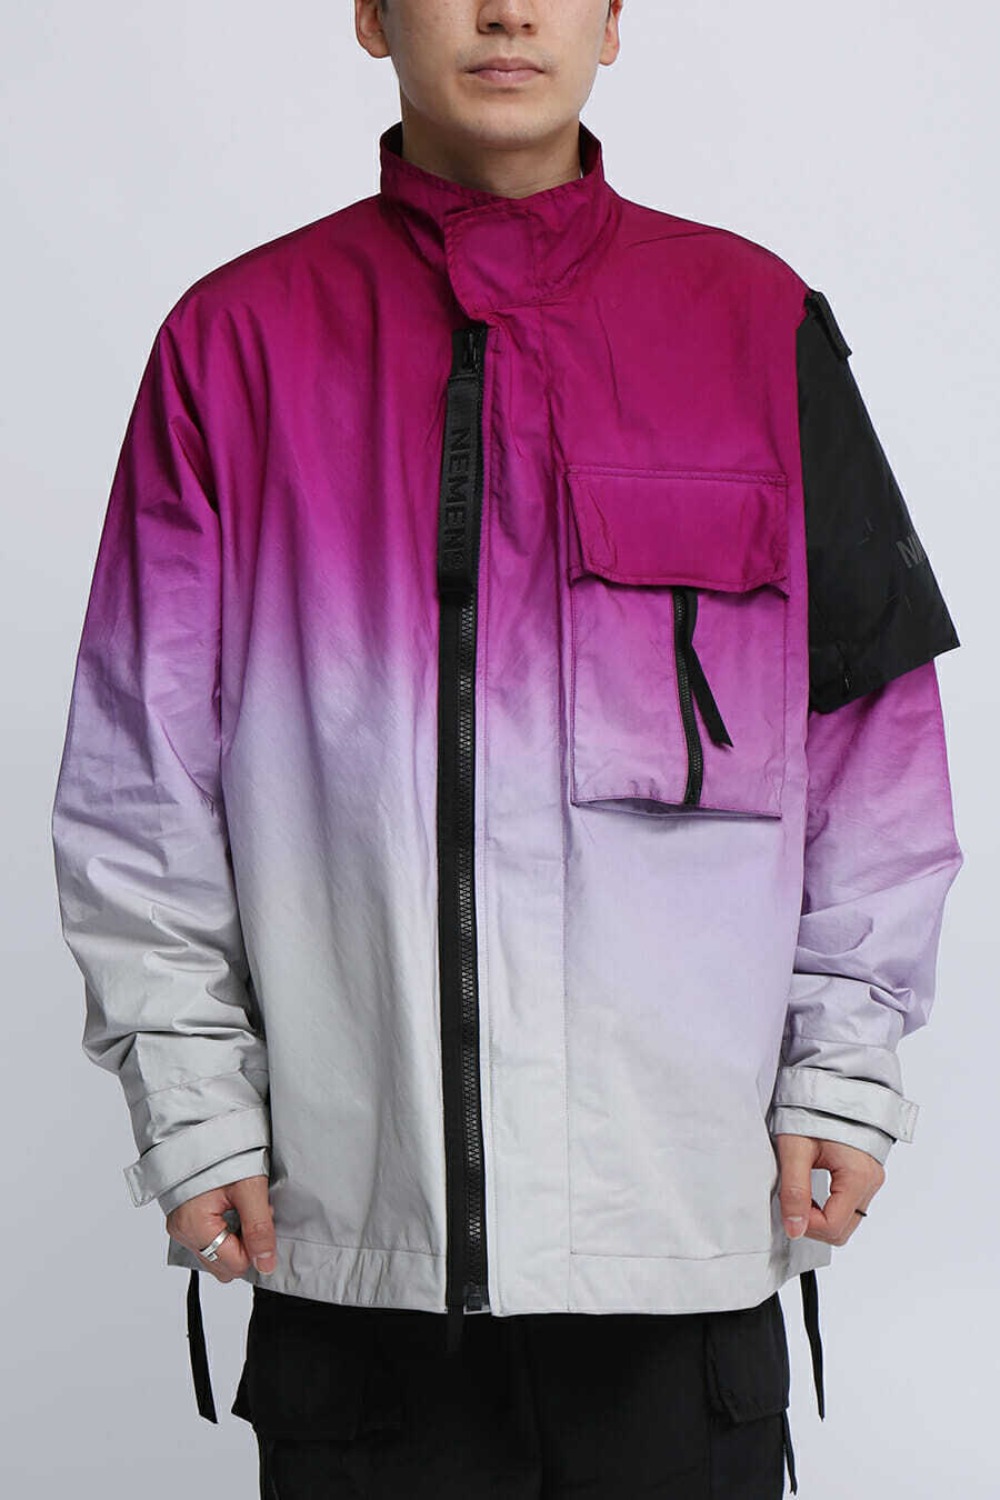 WOVEN ZEPHYR 3L JACKET DIPPING PURPLE